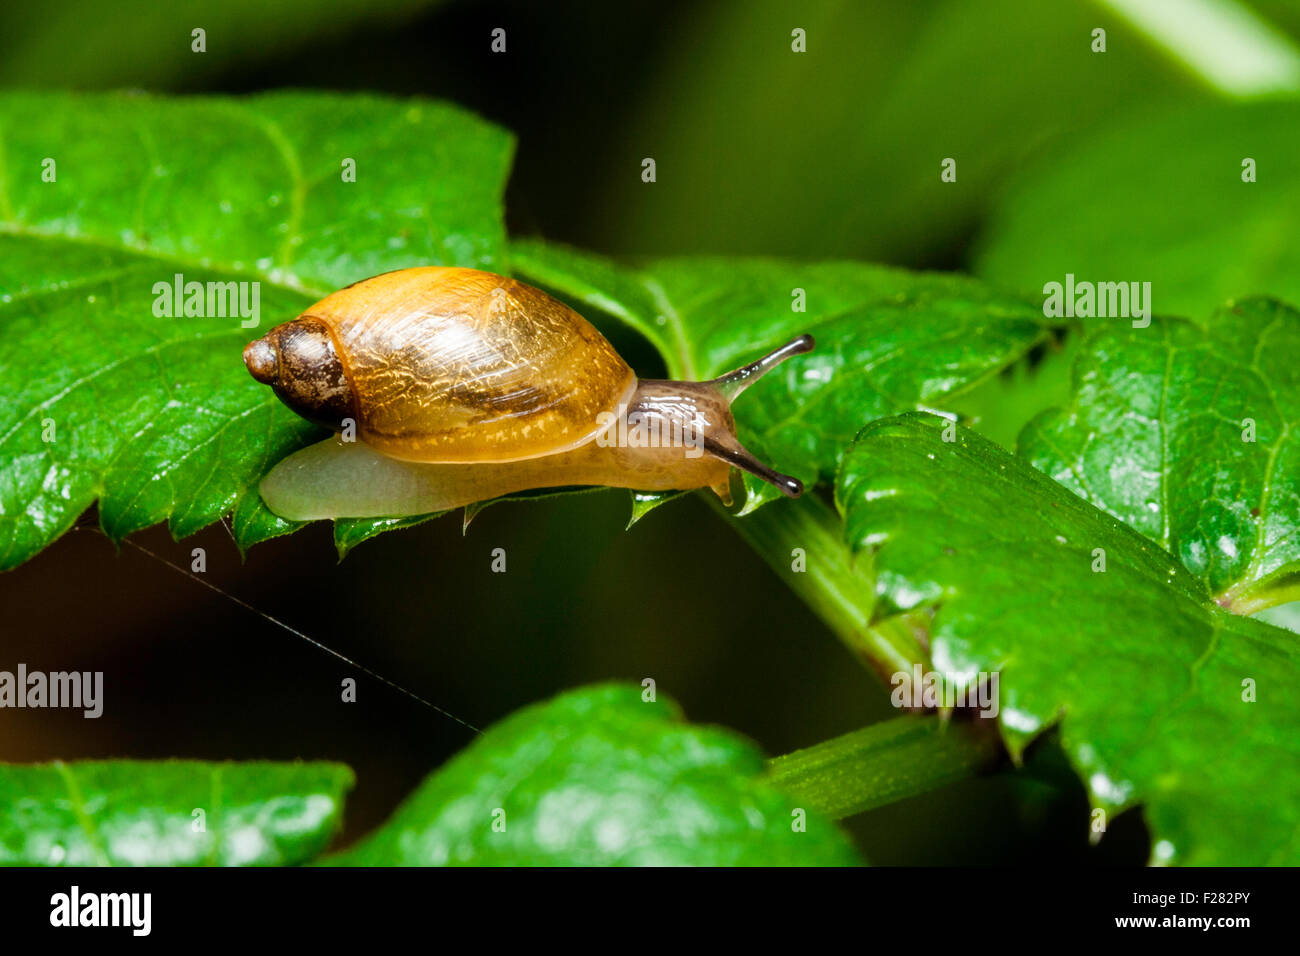 Small Amber Snail, 'Succinea putris', crawling over from one leaf to another after rainfall. Macro close up. Stock Photo